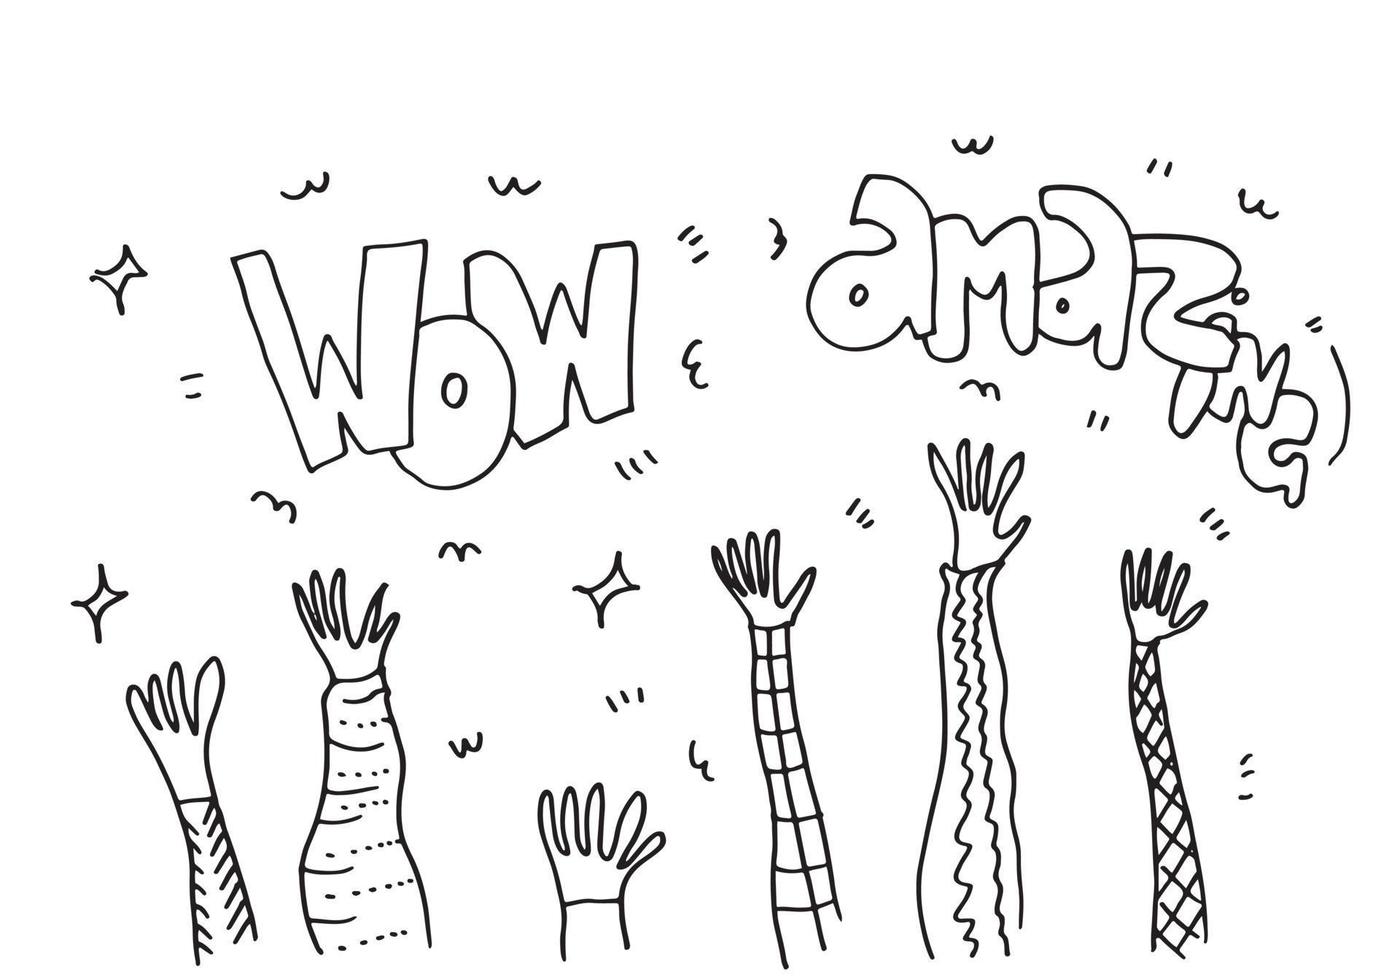 Applause hand draw on white background with wow amazing text.vector illustration vector